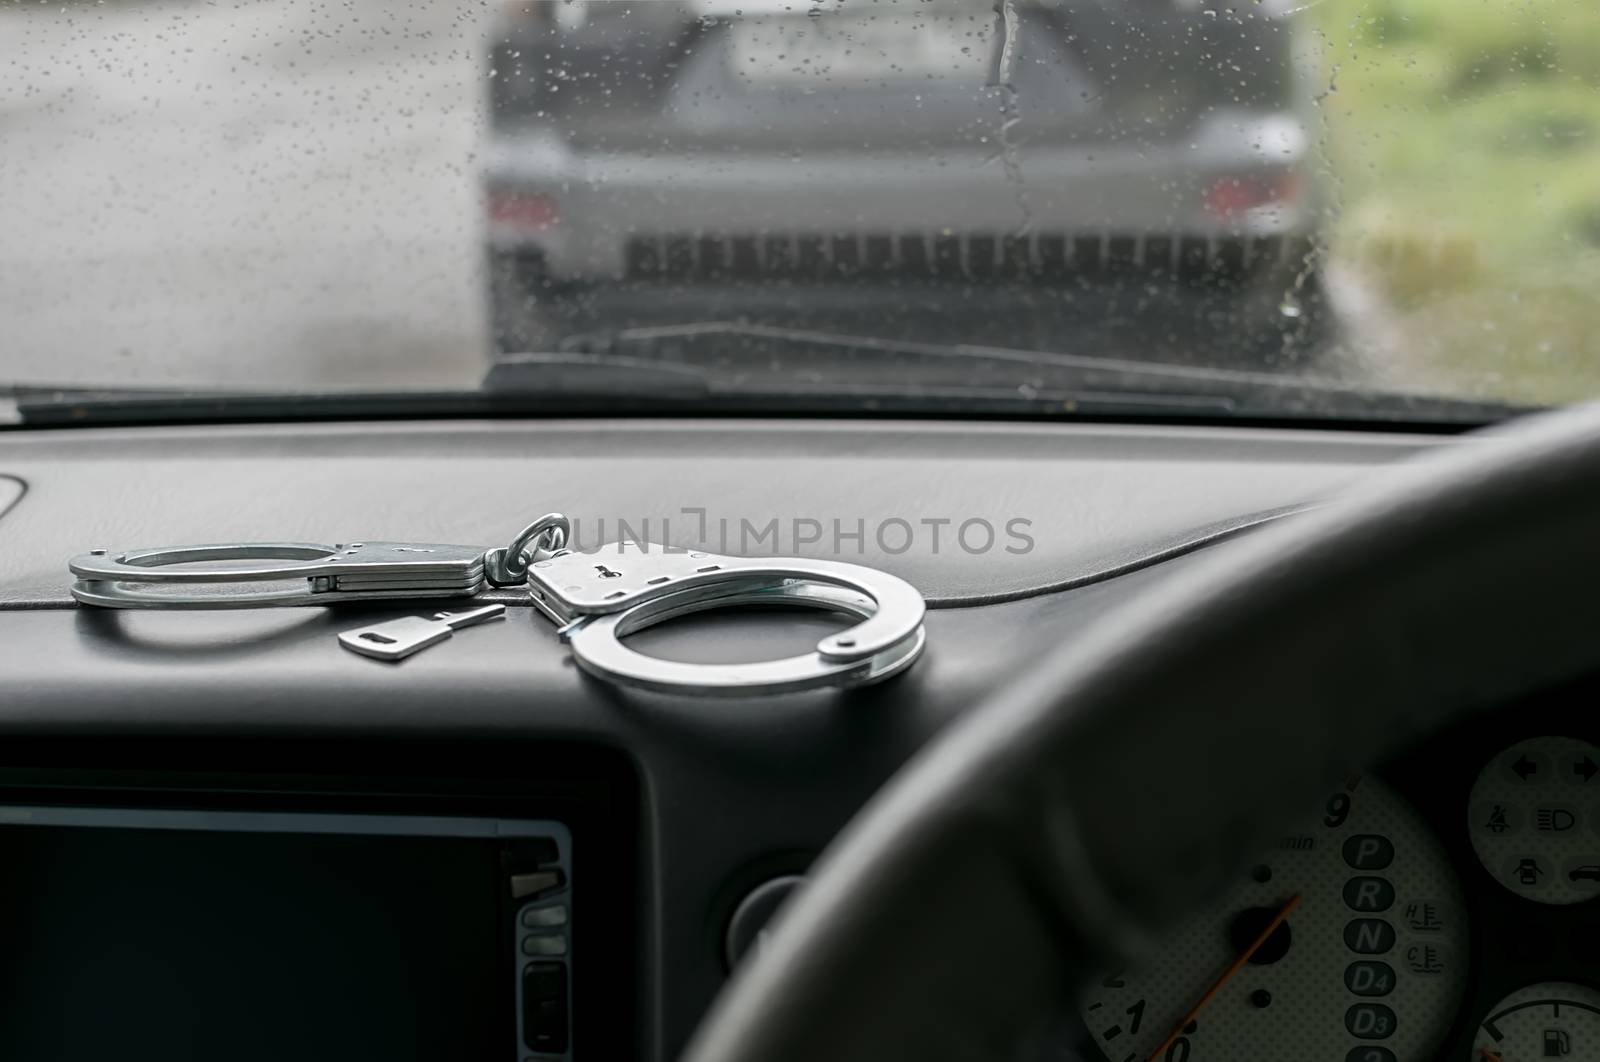 metal handcuffs lie on the dashboard of the car against the rain soaked windscreen